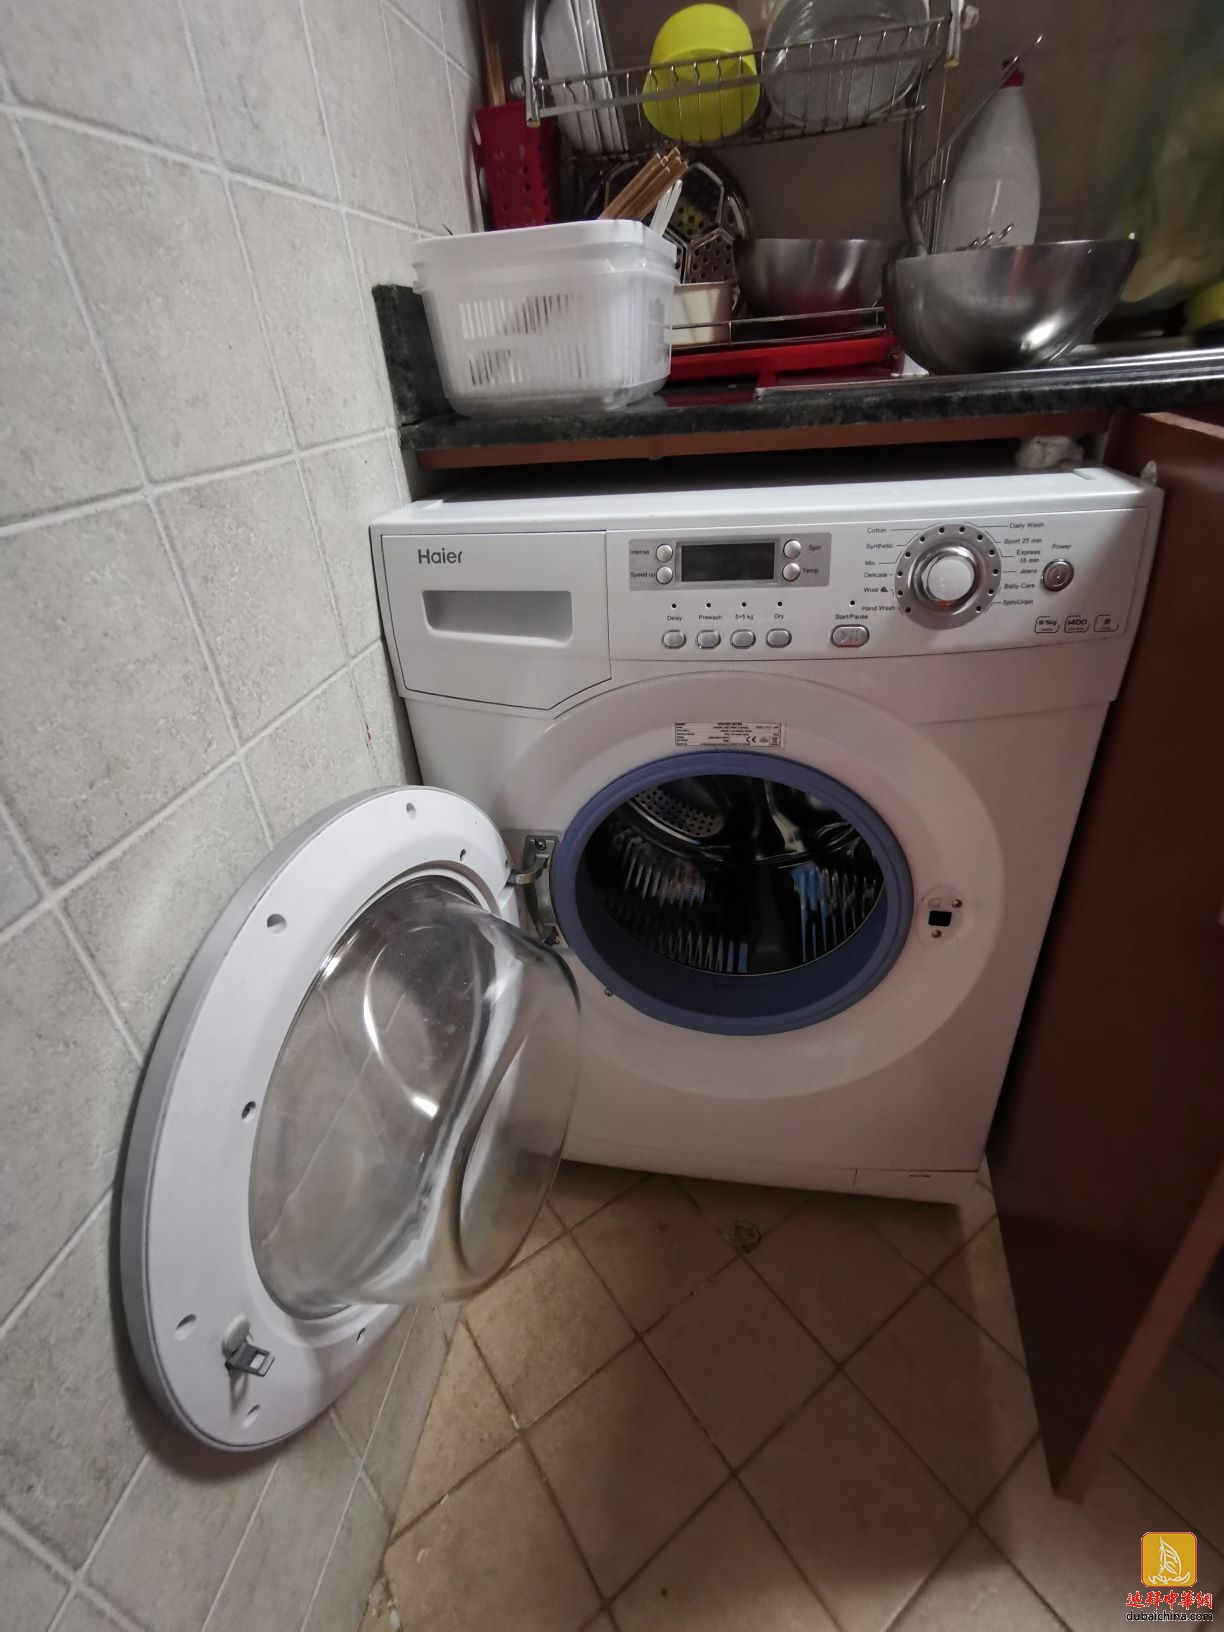 Washing machine with dryer 洗衣机(带烘干） 650 AED